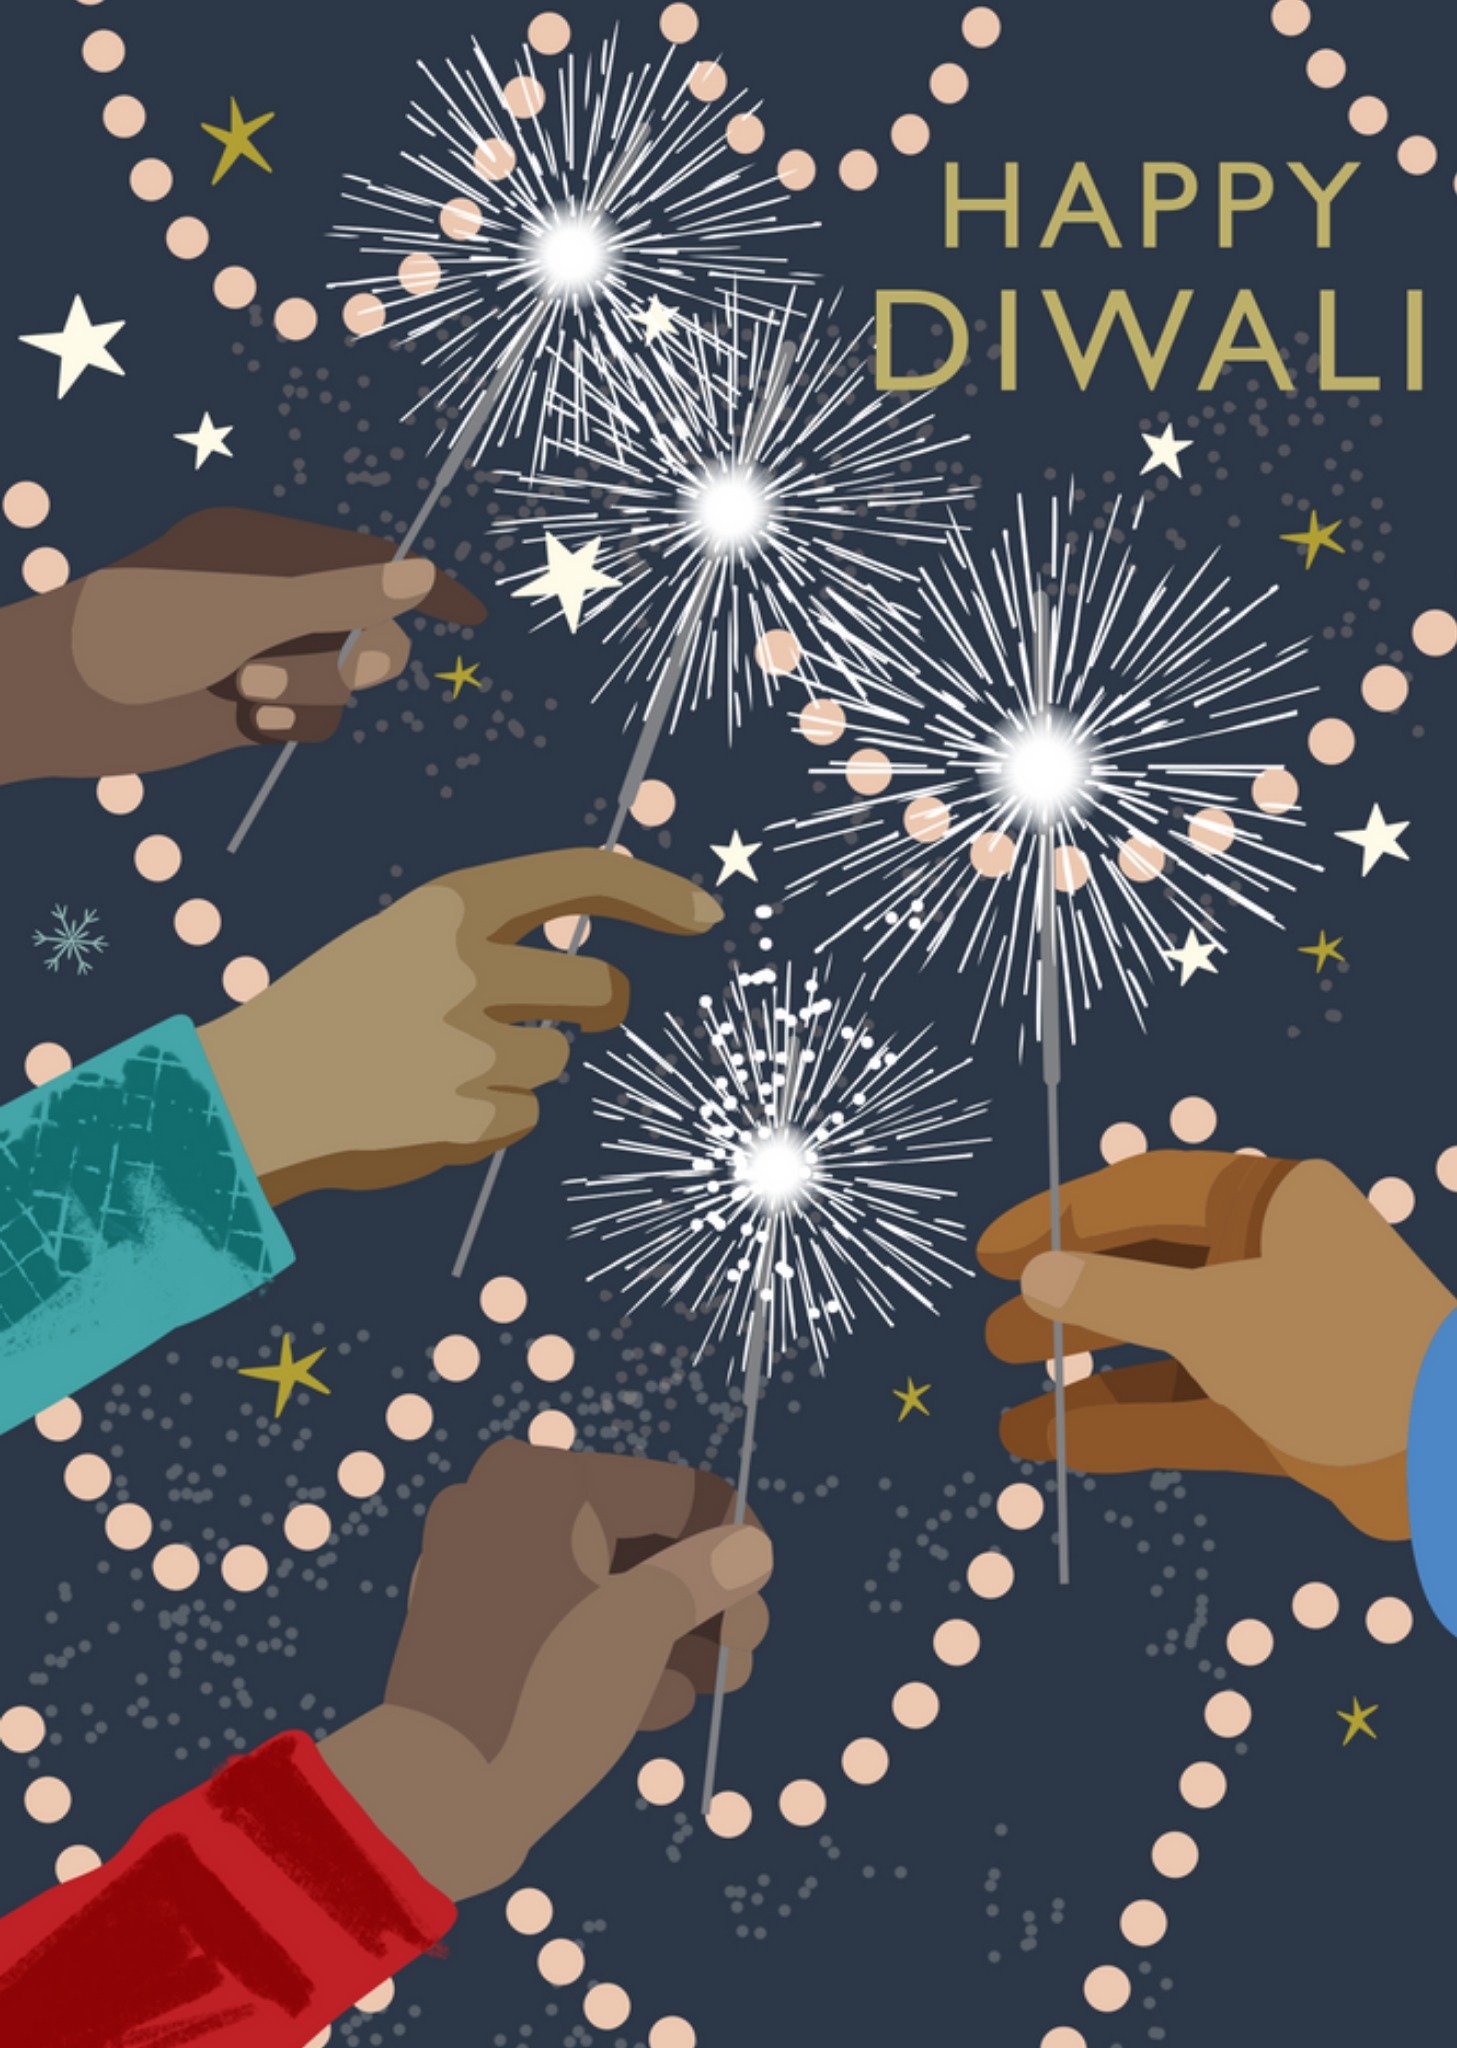 Moonpig Cheerful Illustrated Hands Holding Sparklers Happy Diwali Card Ecard